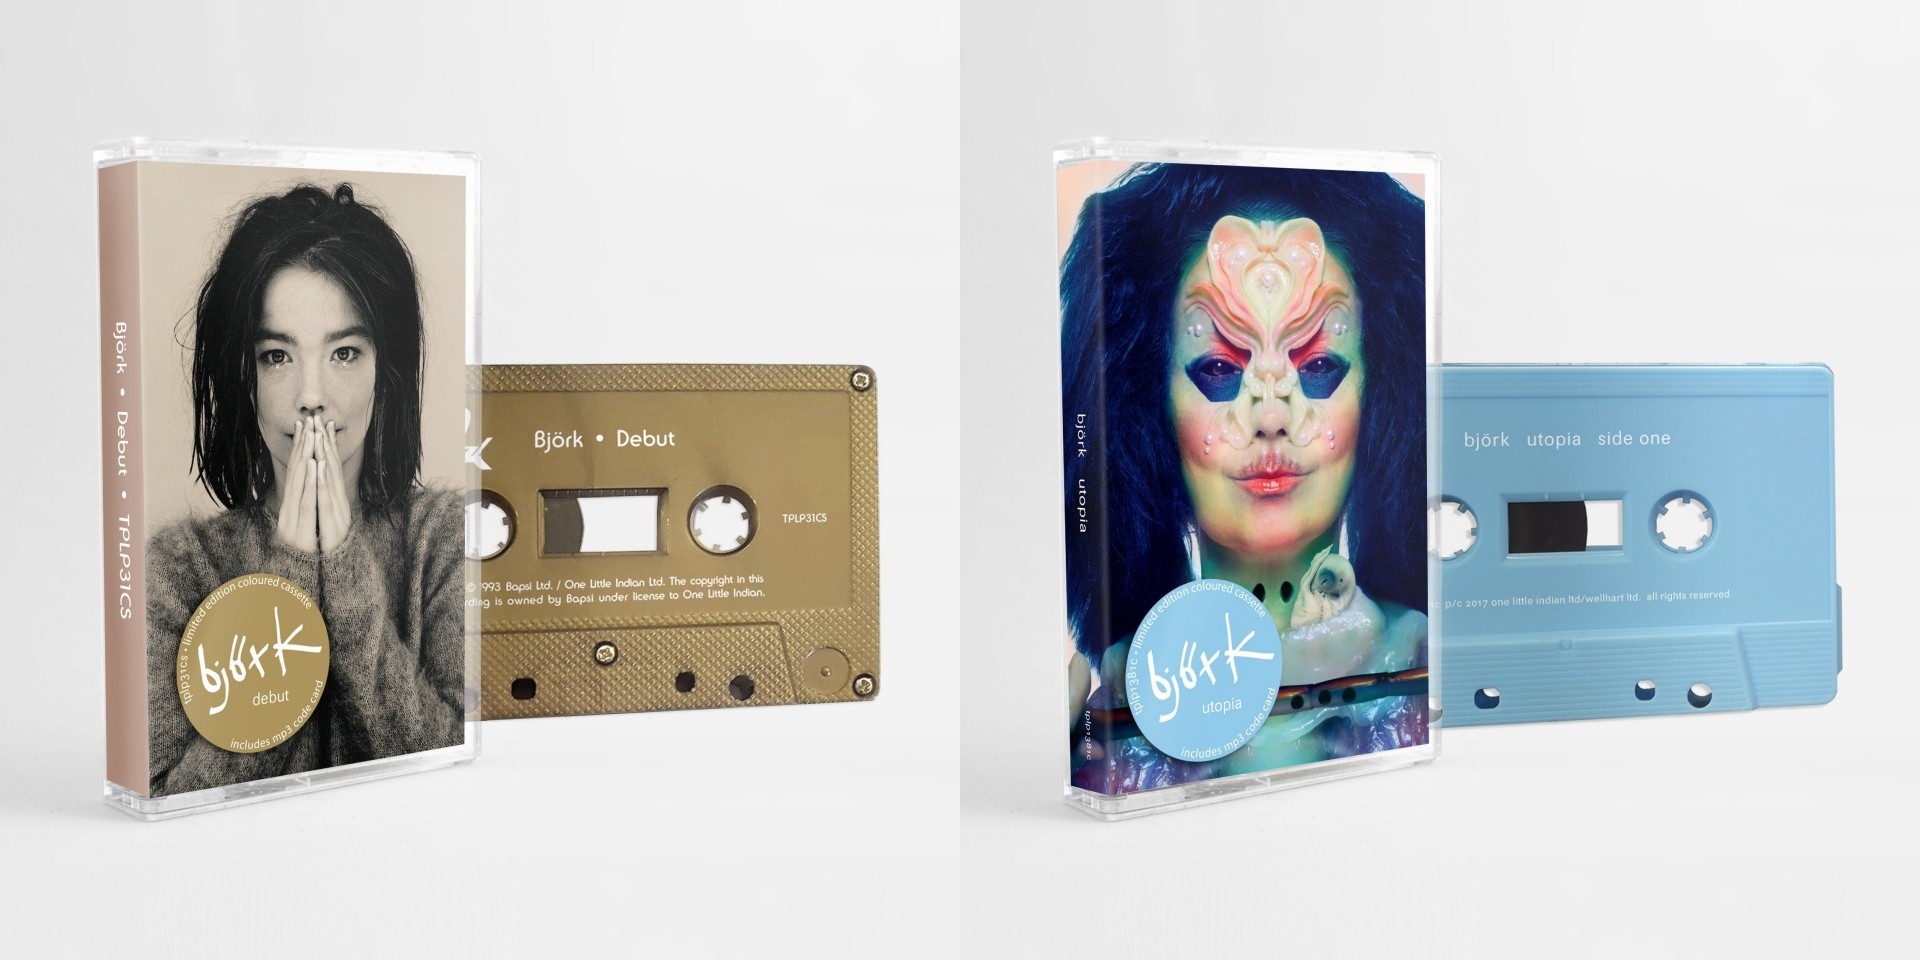 Björk will reissue all albums on limited edition cassettes